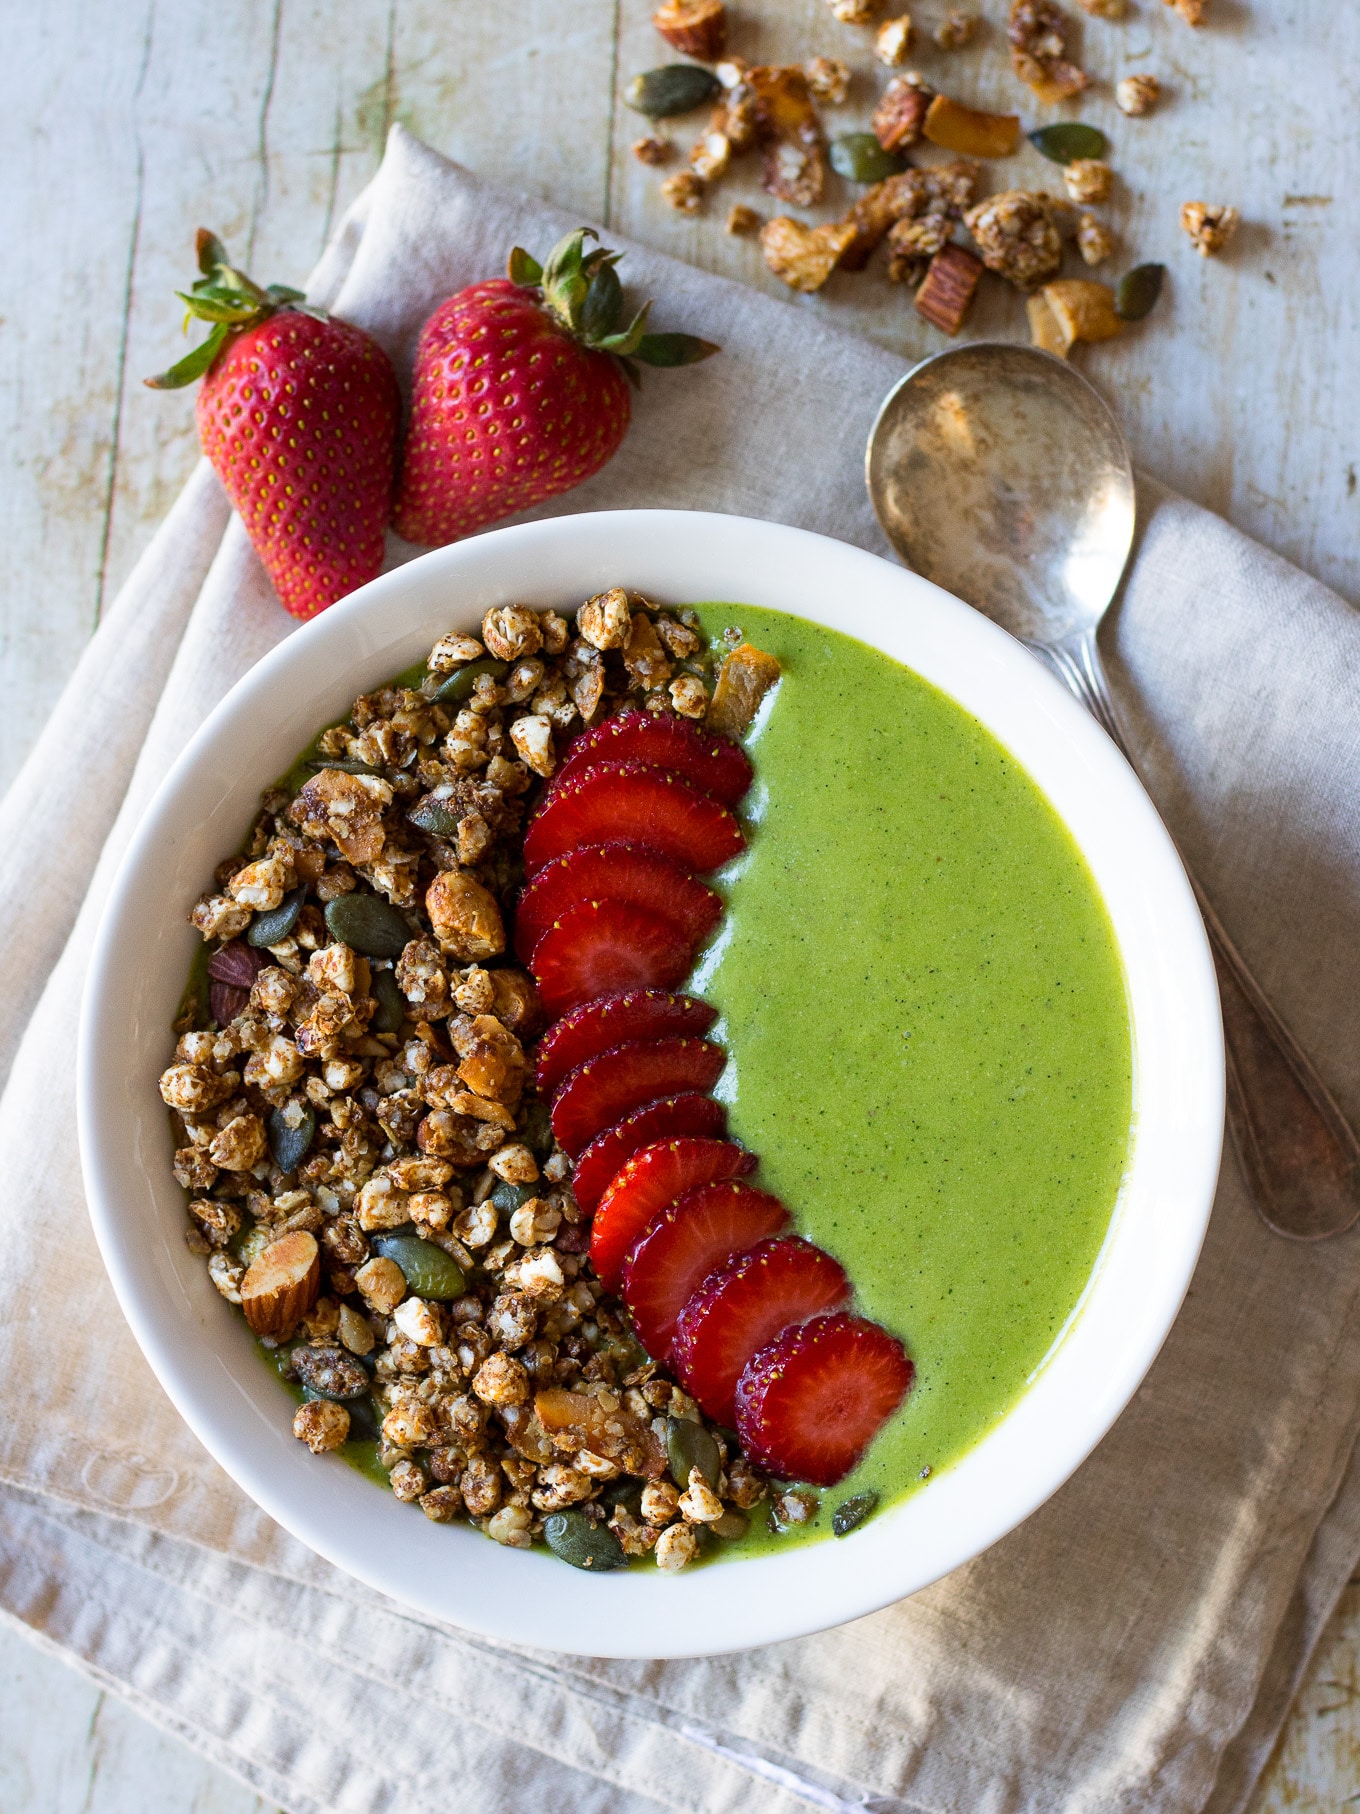 A thick green protein #smoothiebowl is a quick, satisfying healthy breakfast ready in no time. #paleo and #glutenfree, with an easy vegan #dairyfree option too. #greensmoothie